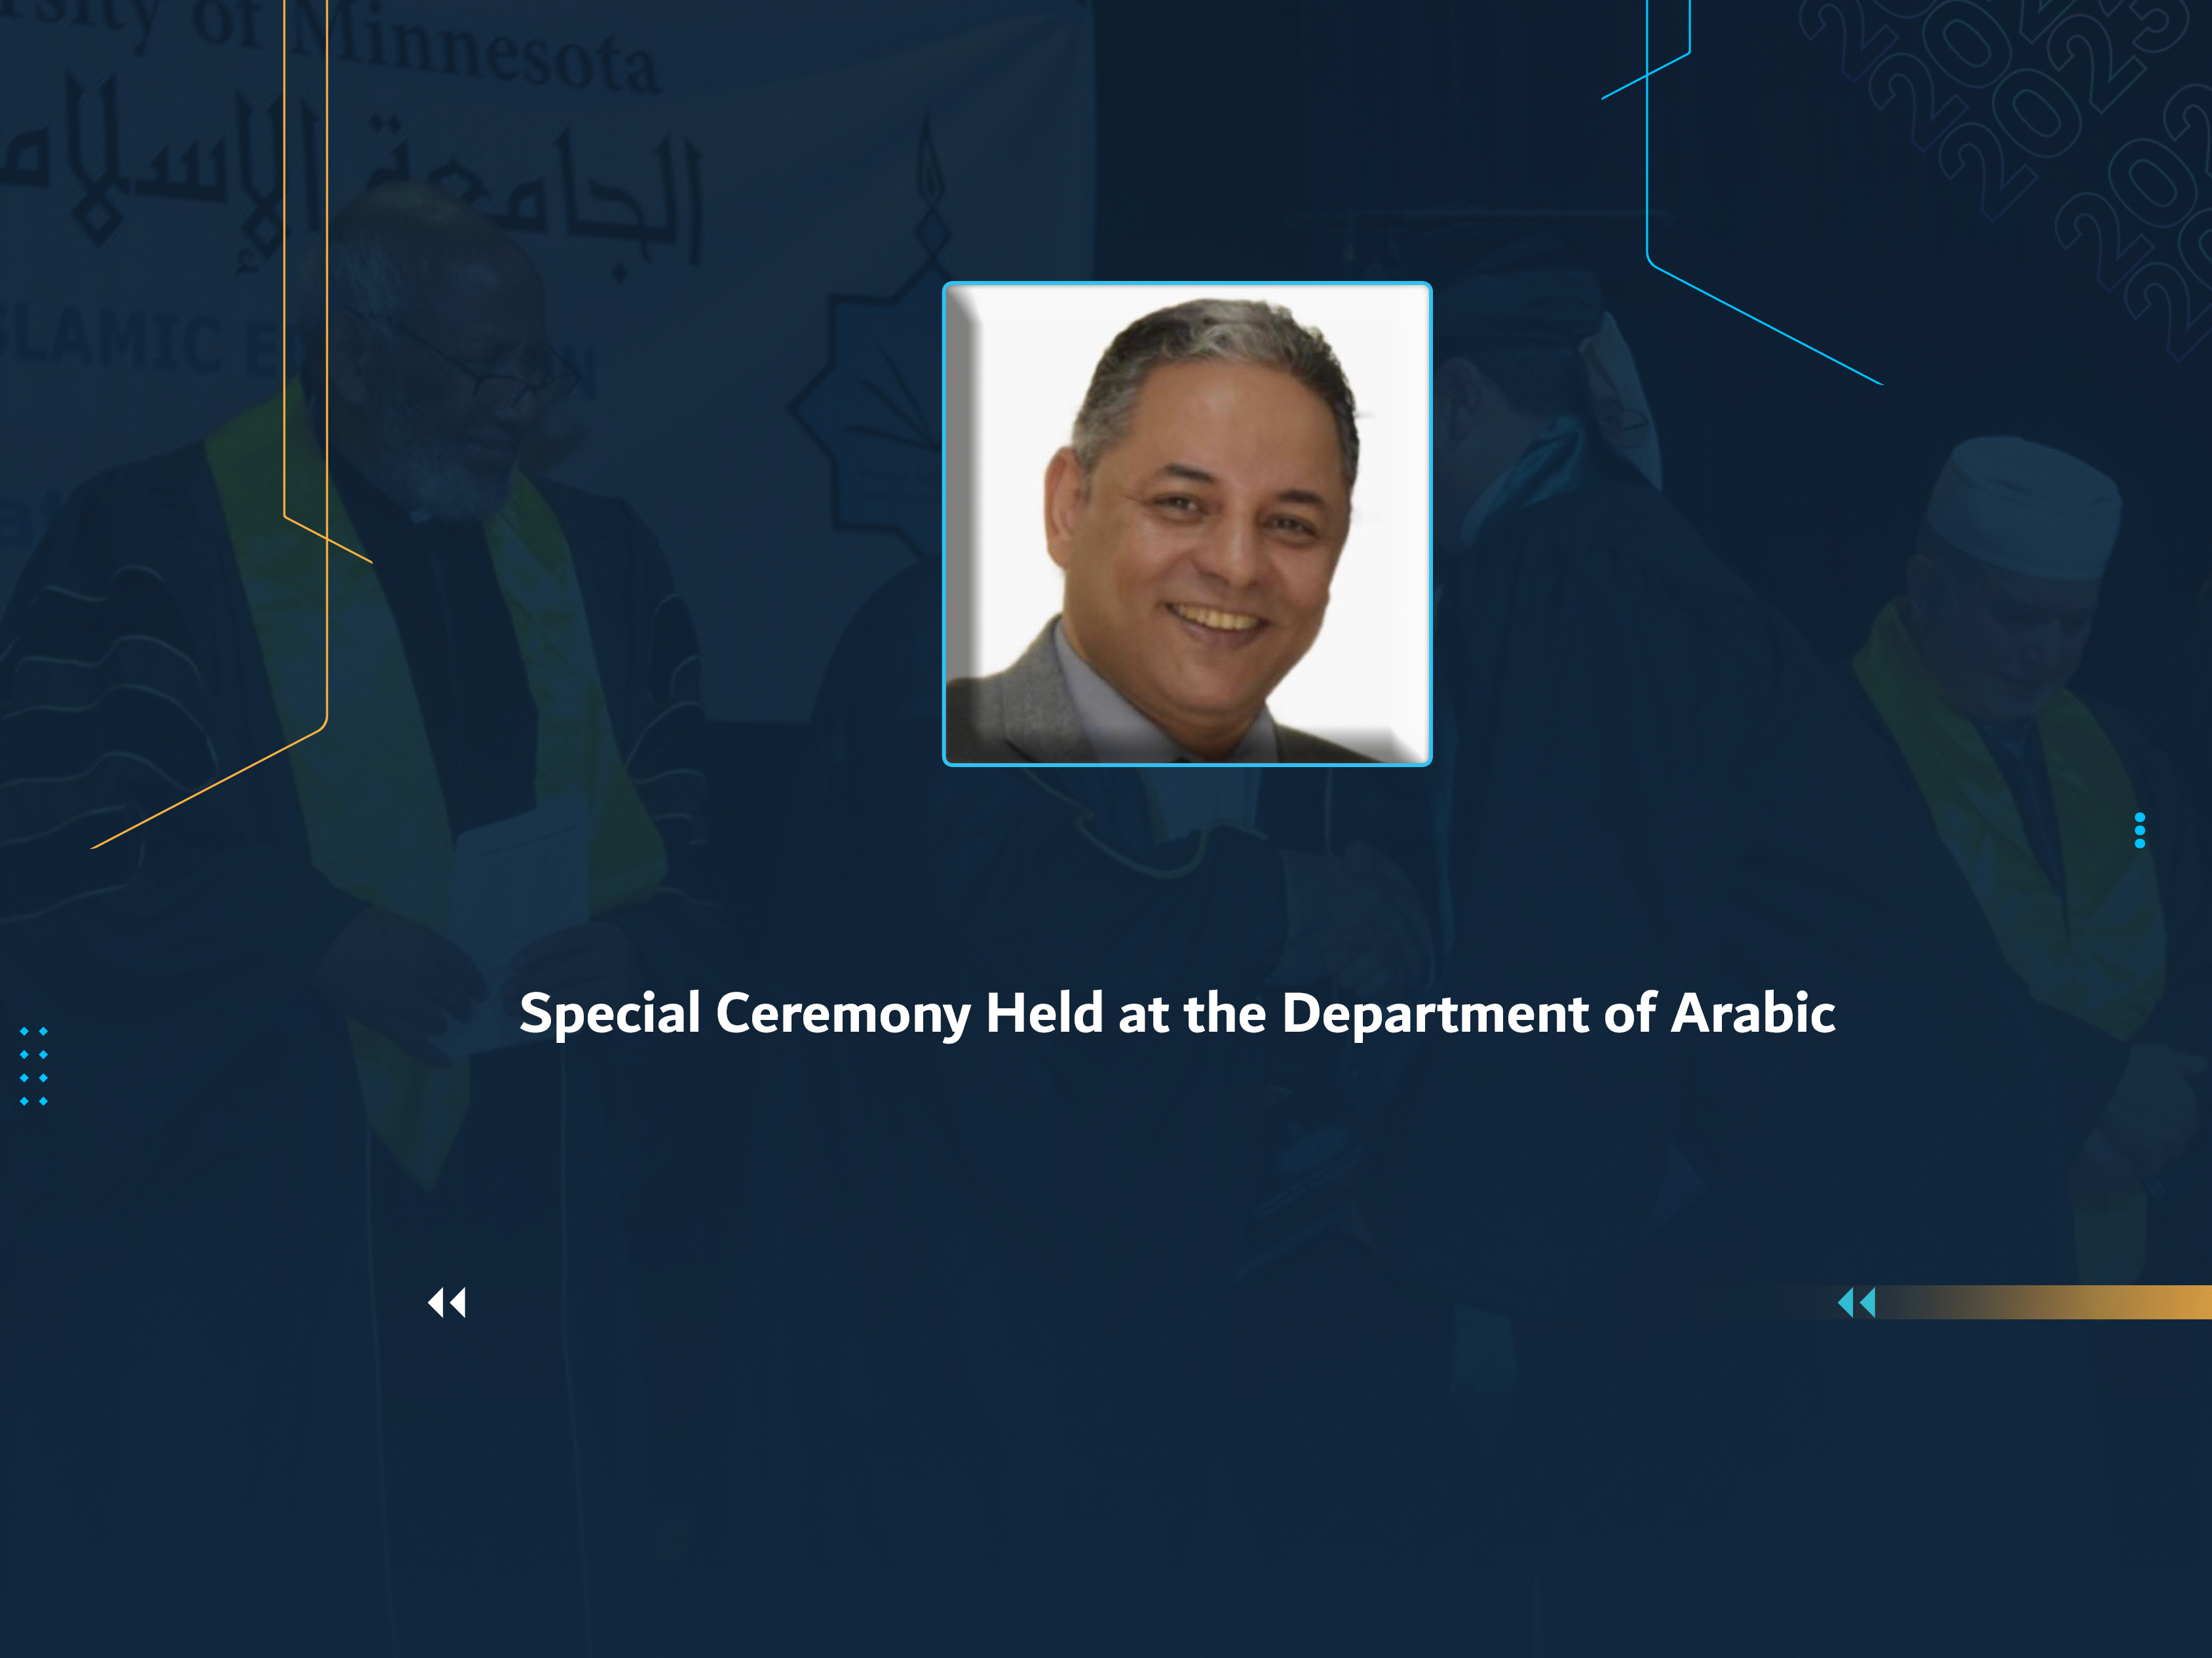 Special Ceremony Held at the Department of Arabic